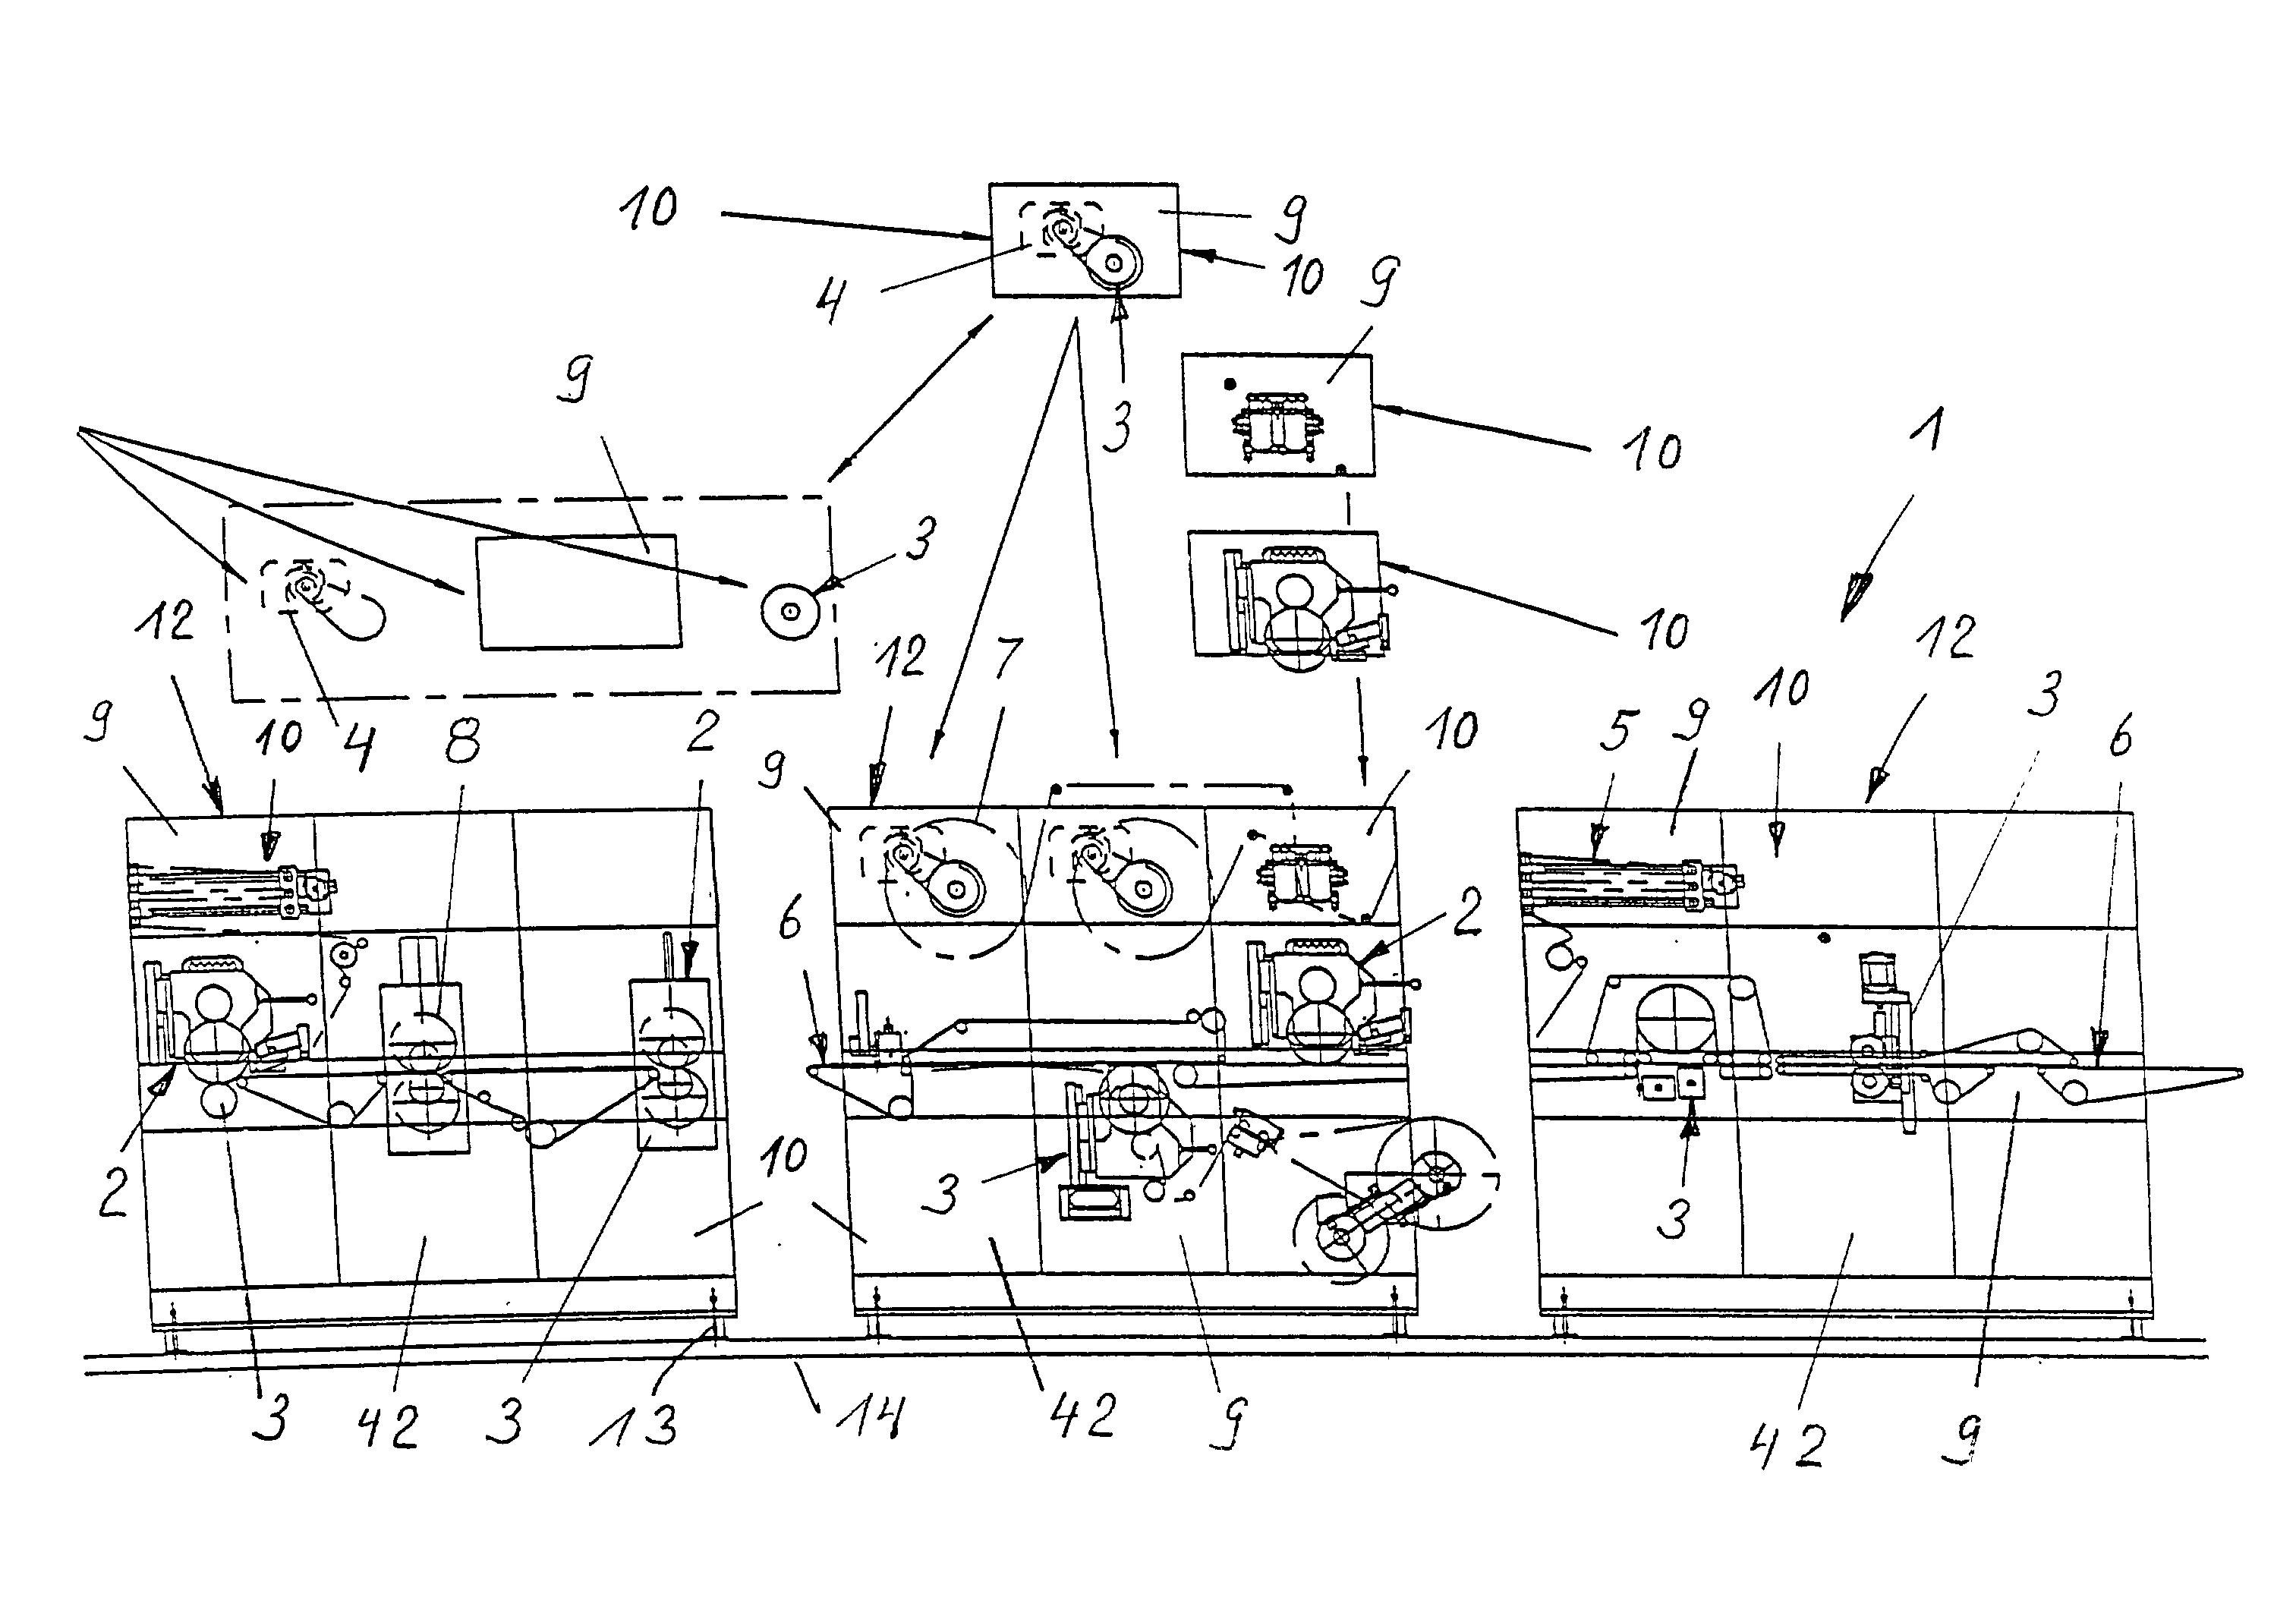 Apparatus for producing hygiene products